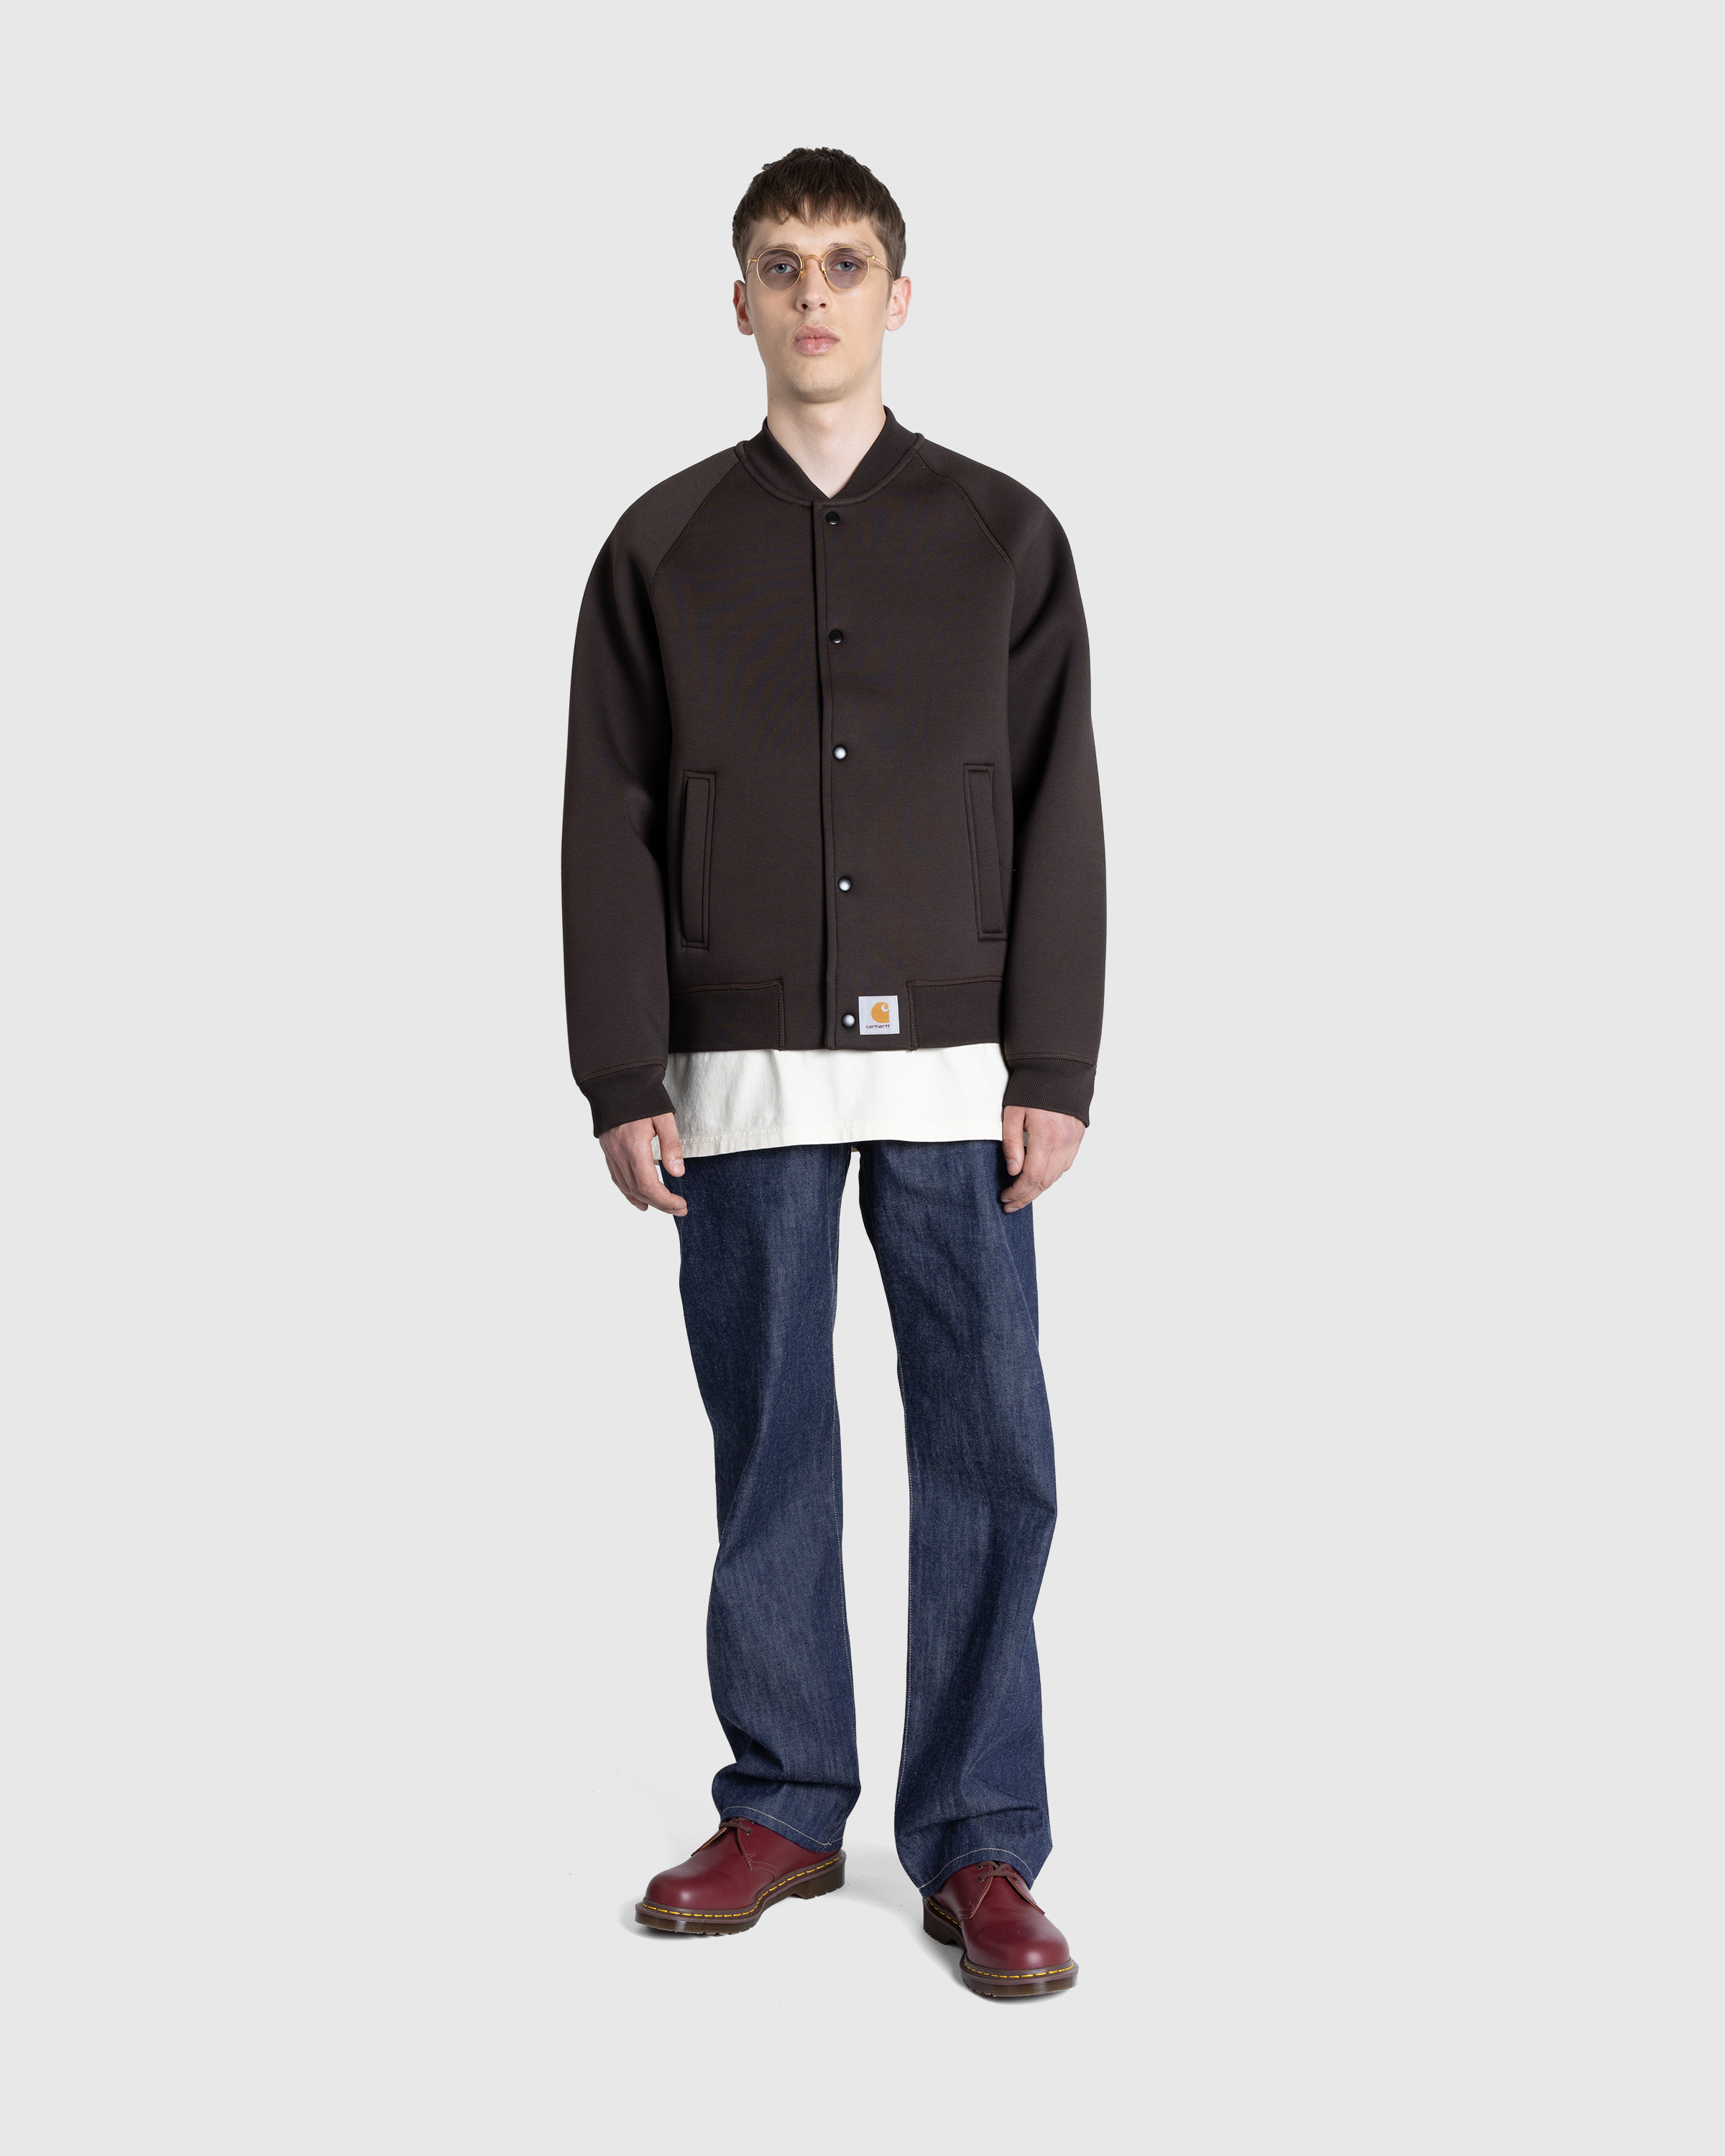 Carhartt WIP – Car-Lux Bomber Tobacco/Grey - Outerwear - Brown - Image 3